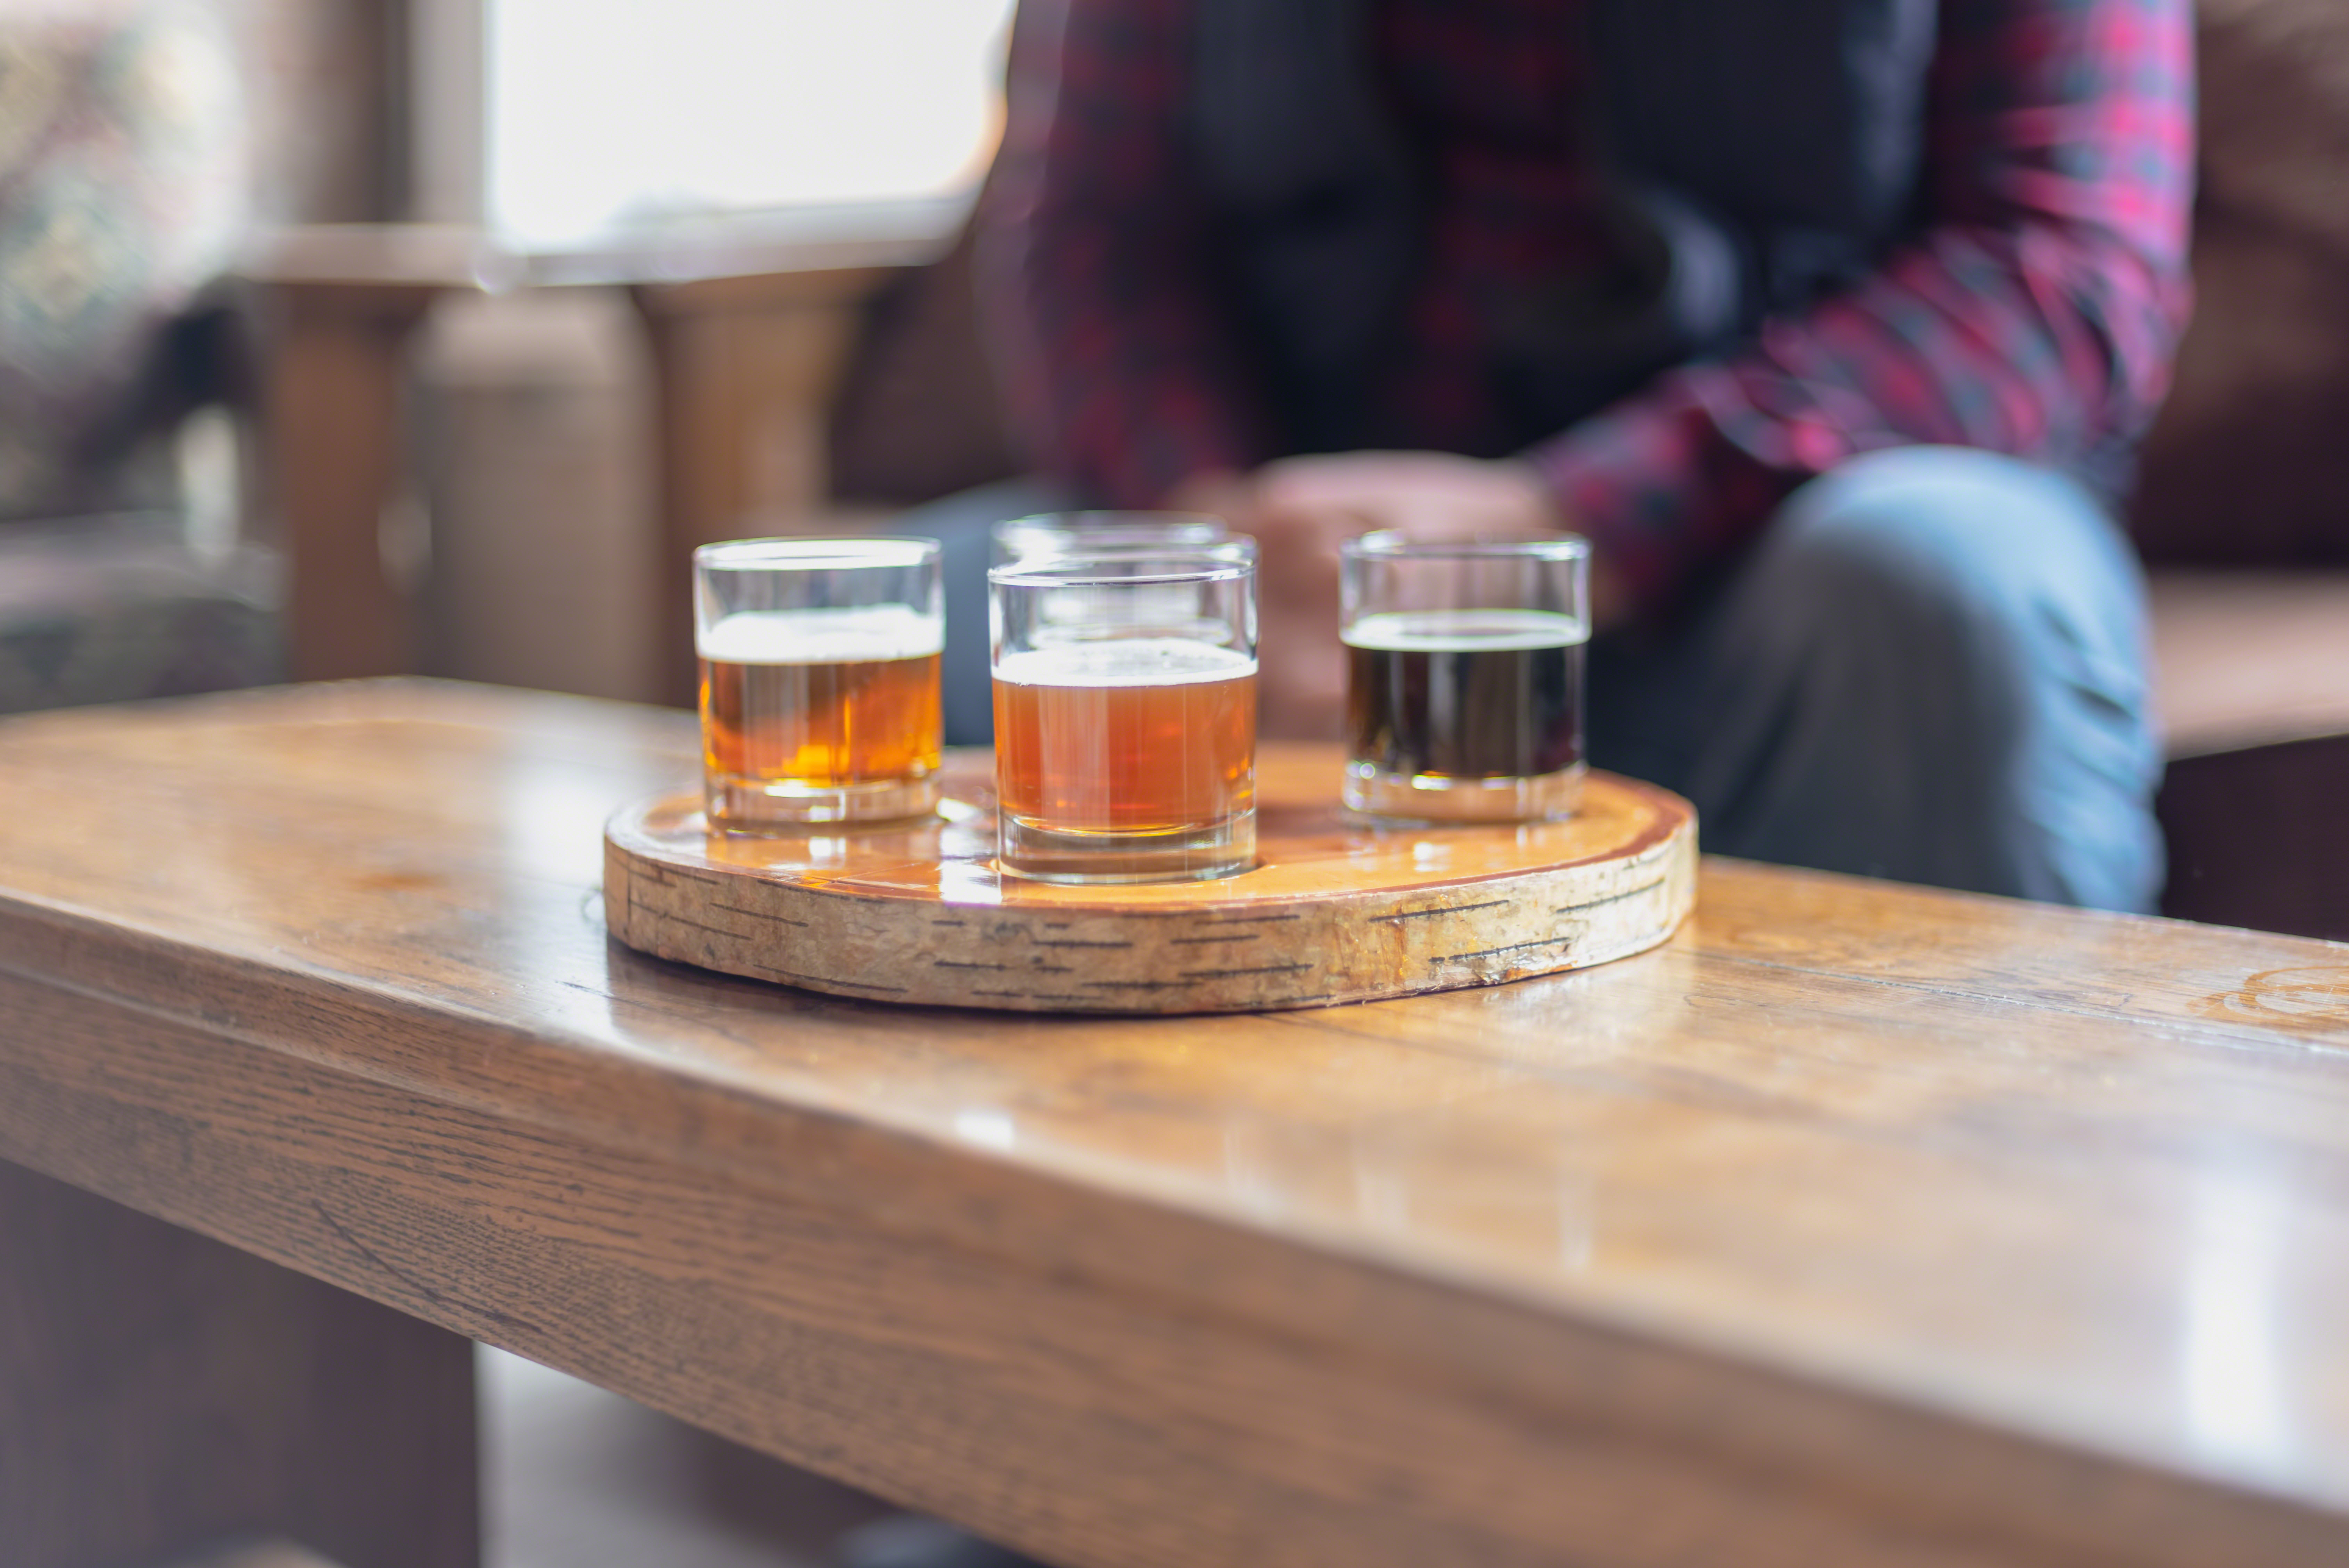 A beer flight in a round wooden carrier on a table.